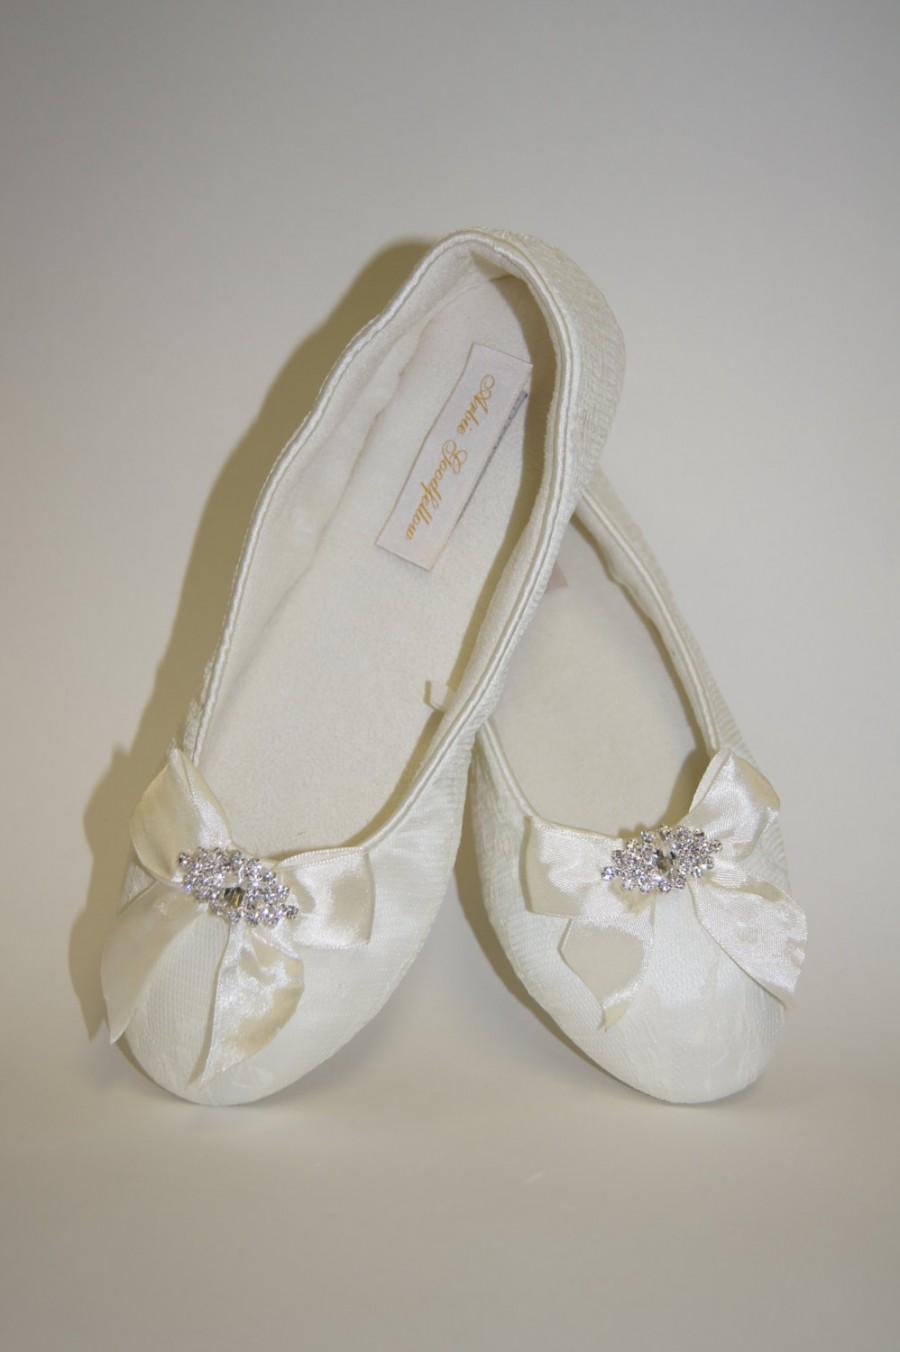 Hochzeit - Flat Lace Wedding Shoes - Choose From White Or Ivory Lace Flat Shoes - Ribbons And Crystals - Comfortable Flat Lace Wedding Shoes - Parisxox